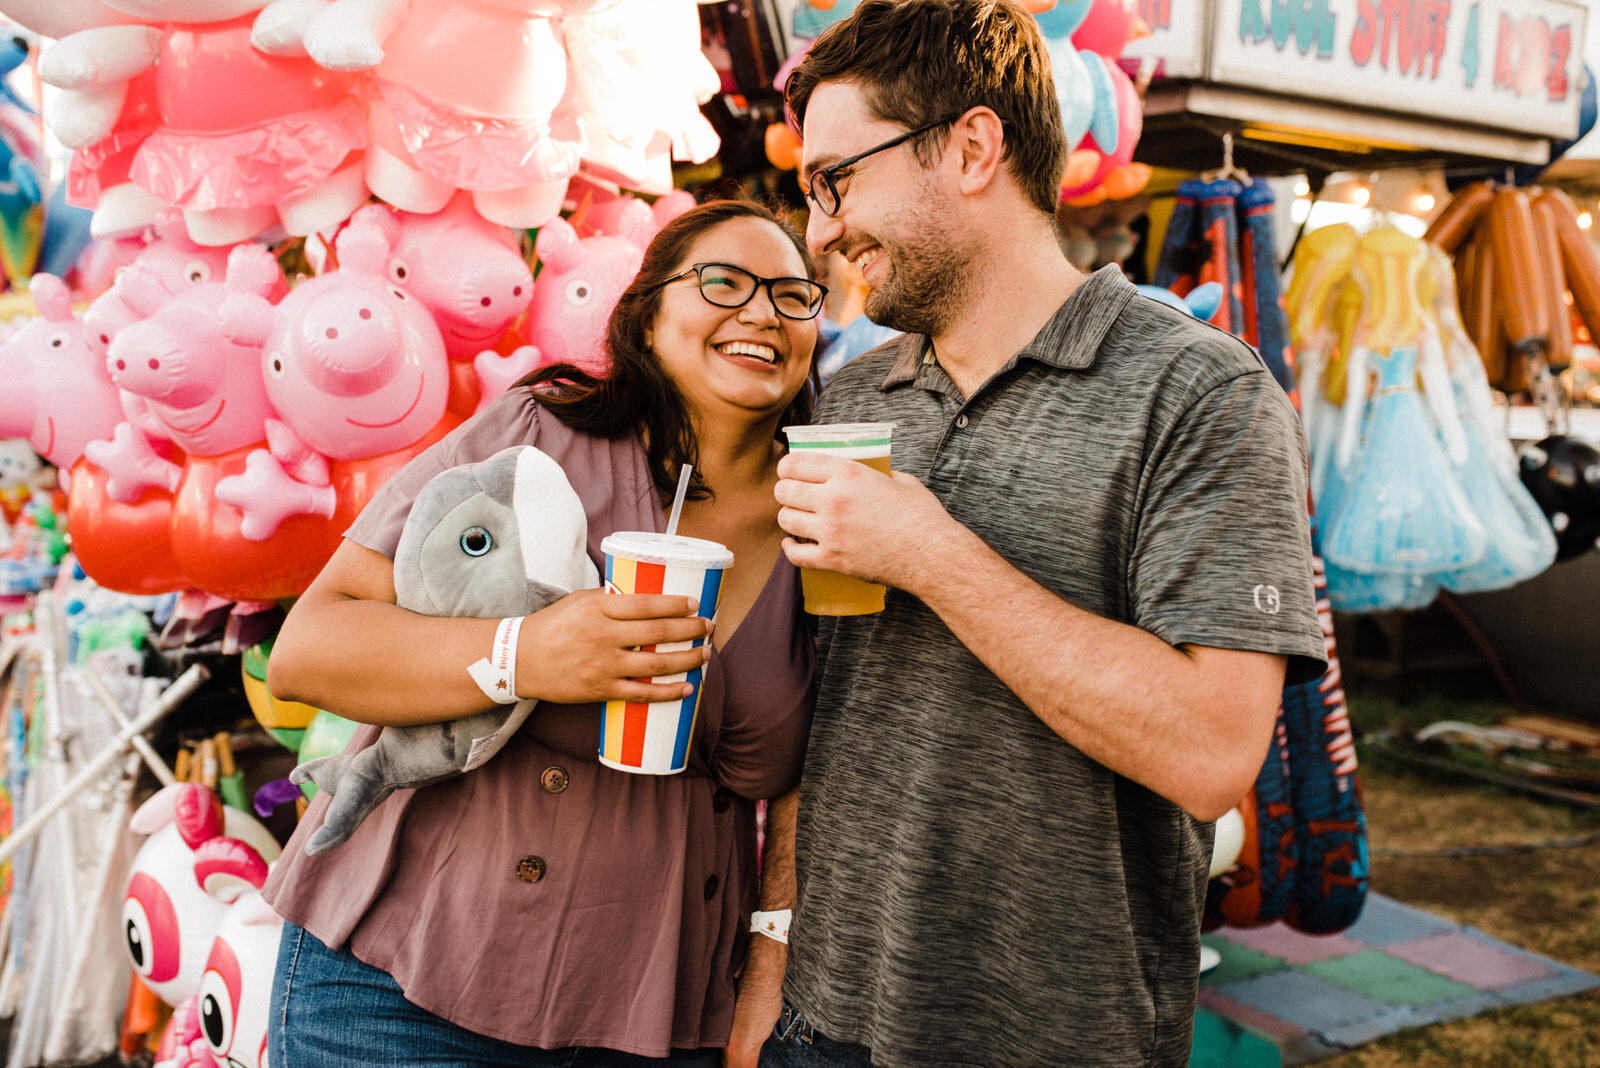 Orange county fair engagement photos with stuffed animals and beer